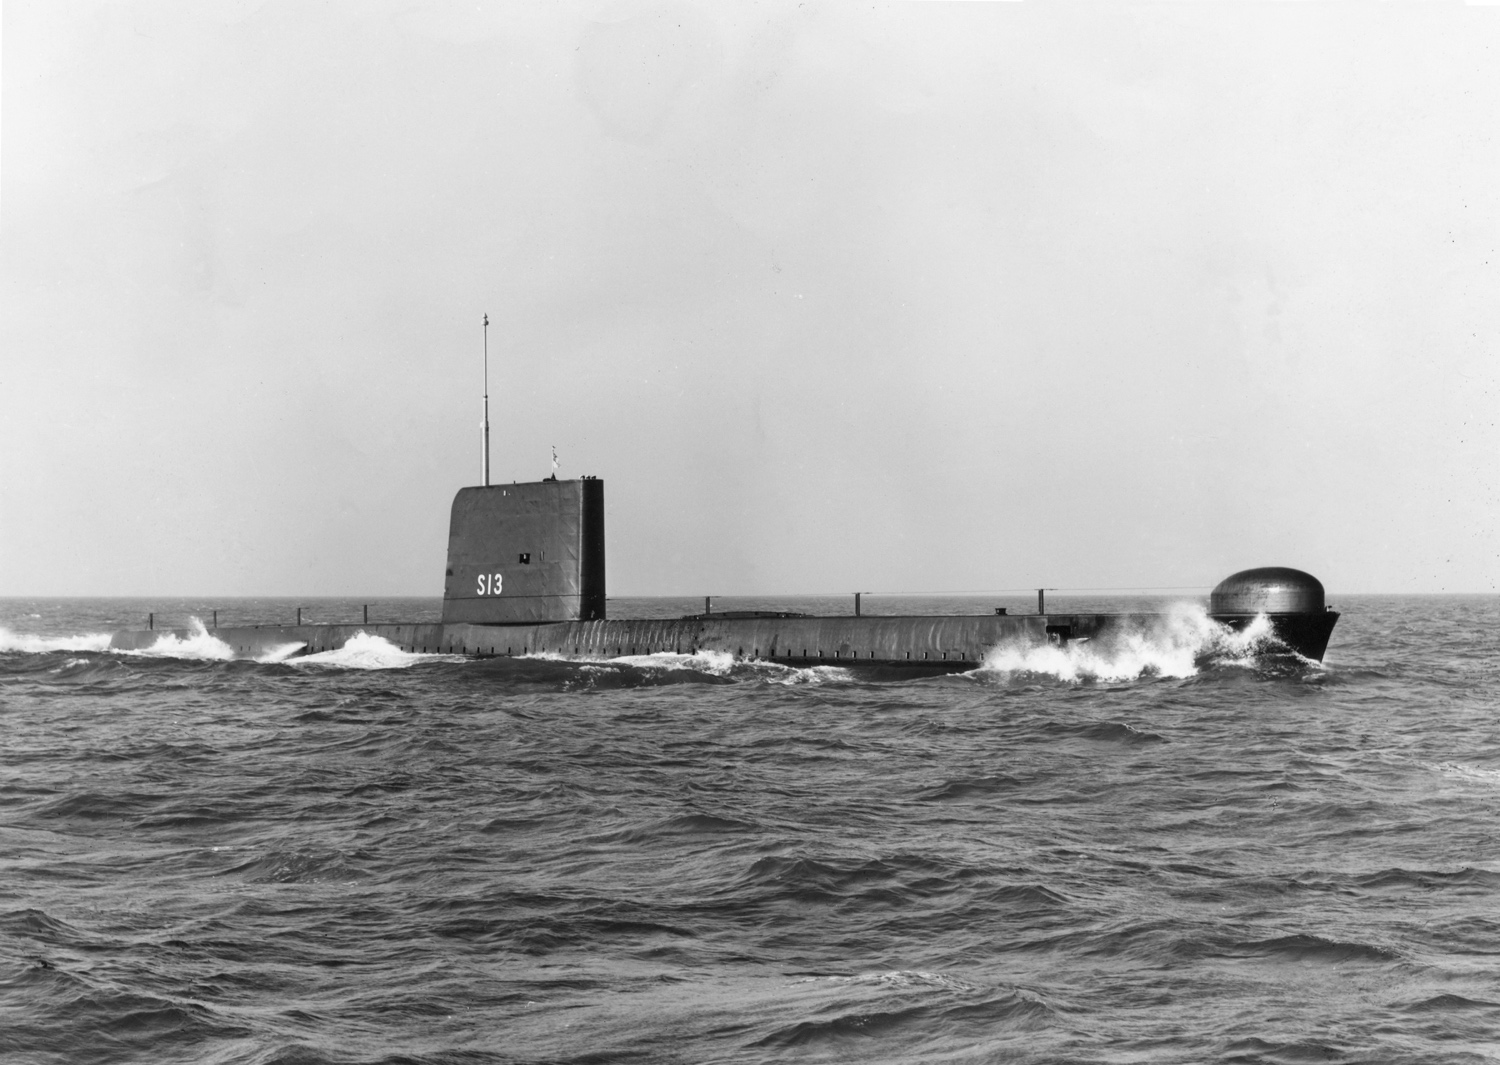 The British diesel-electric submarine HMS Osiris of the Cold War. Photo: BAE Systems archive.